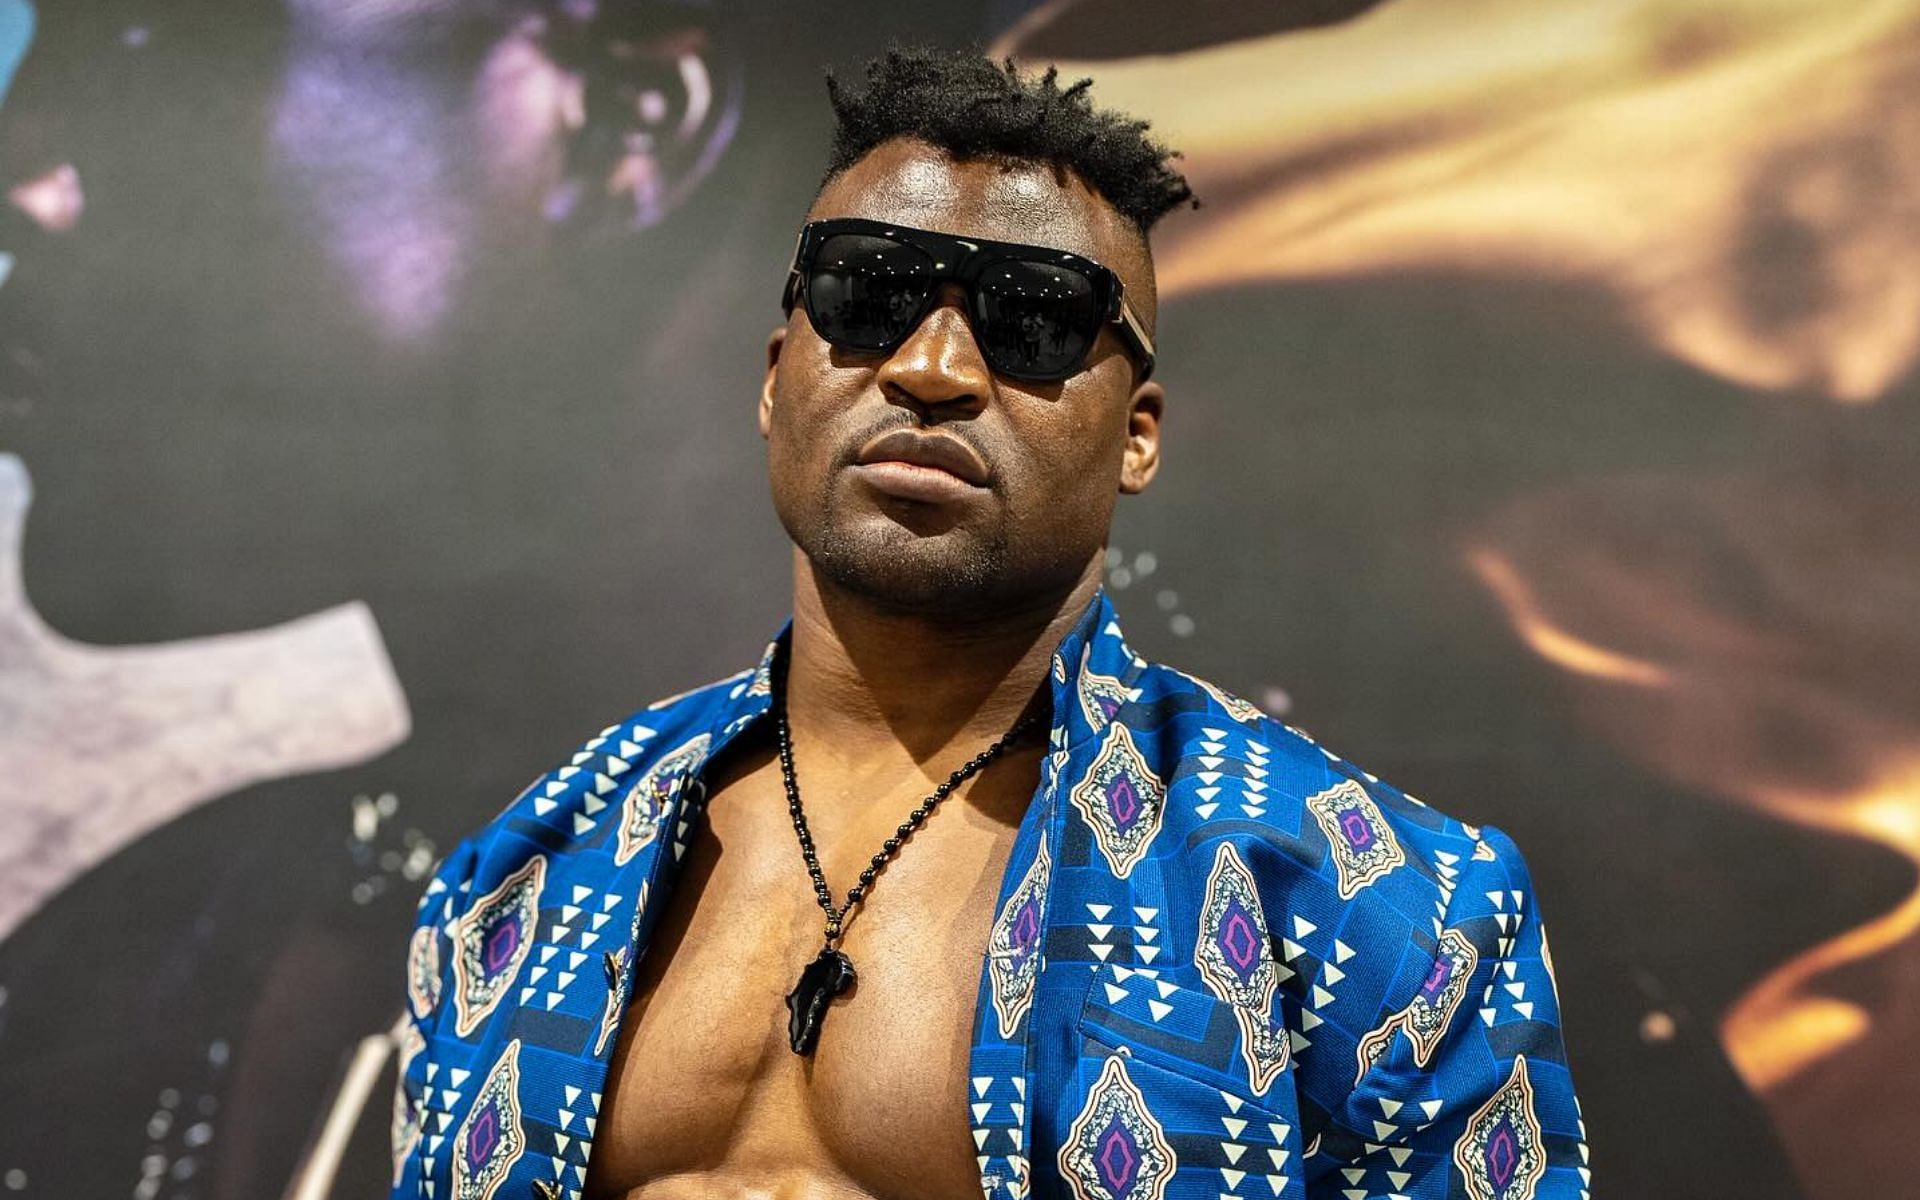 Where does Francis Ngannou rank in the UFC